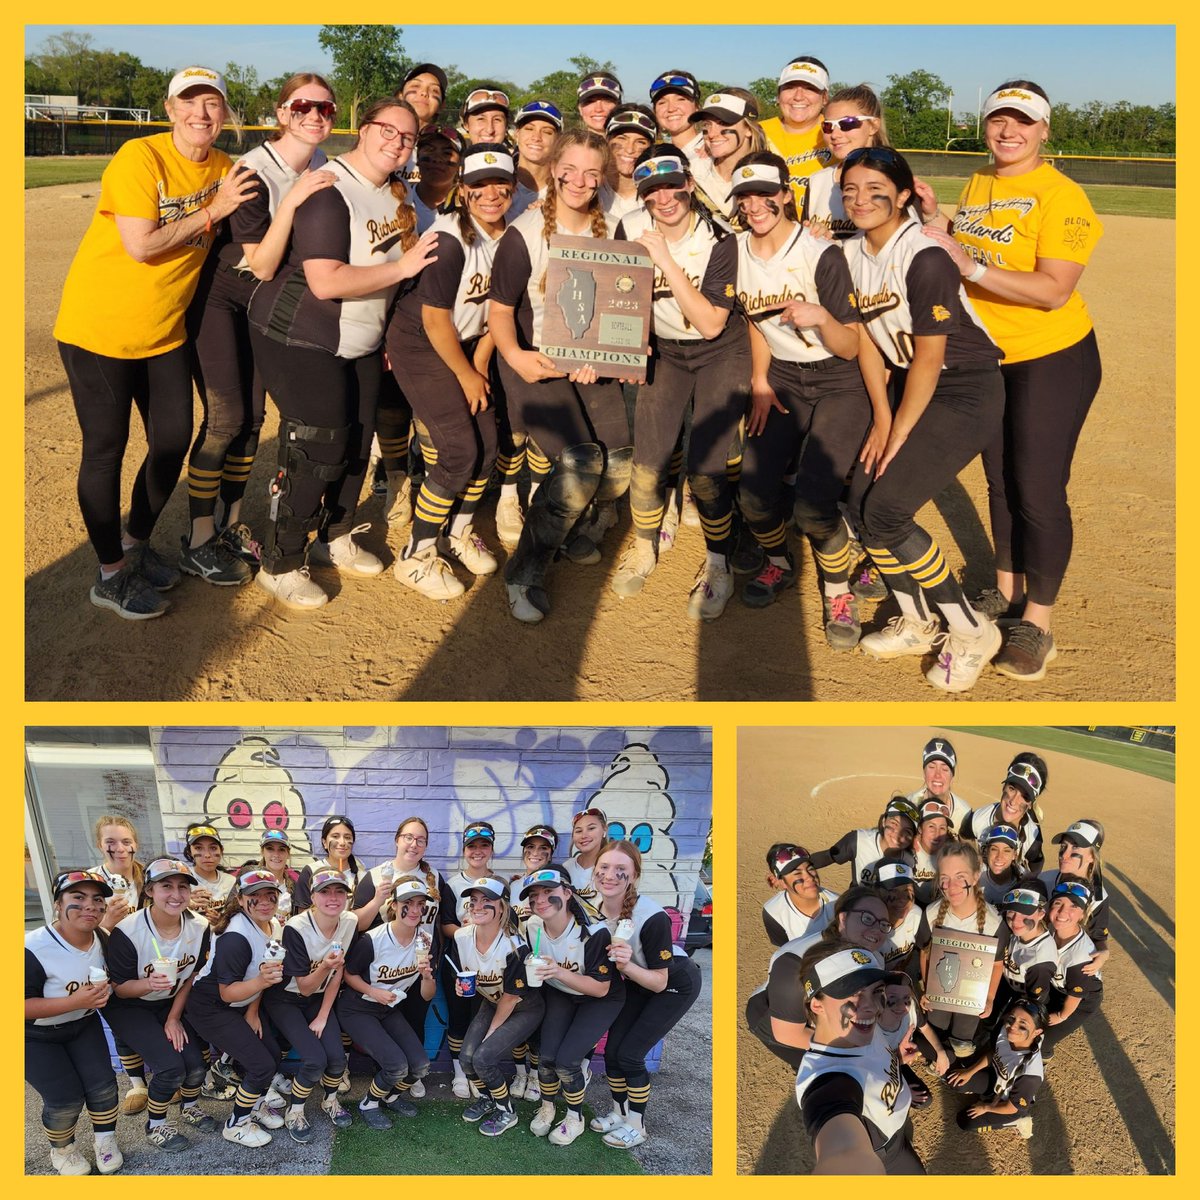 📢Congrats to our Richards Bulldogs- REGIONAL CHAMPIONS!! The Bulldogs defeated the very tough Hinsdale South HS 6-4. Total TEAM win! OneTeam🥎OneDream! Players play-TEAMS win! 🐾🌟💛🥎💪 #BulldogNation #nonebetter #tothevictorsgothespoils🍨